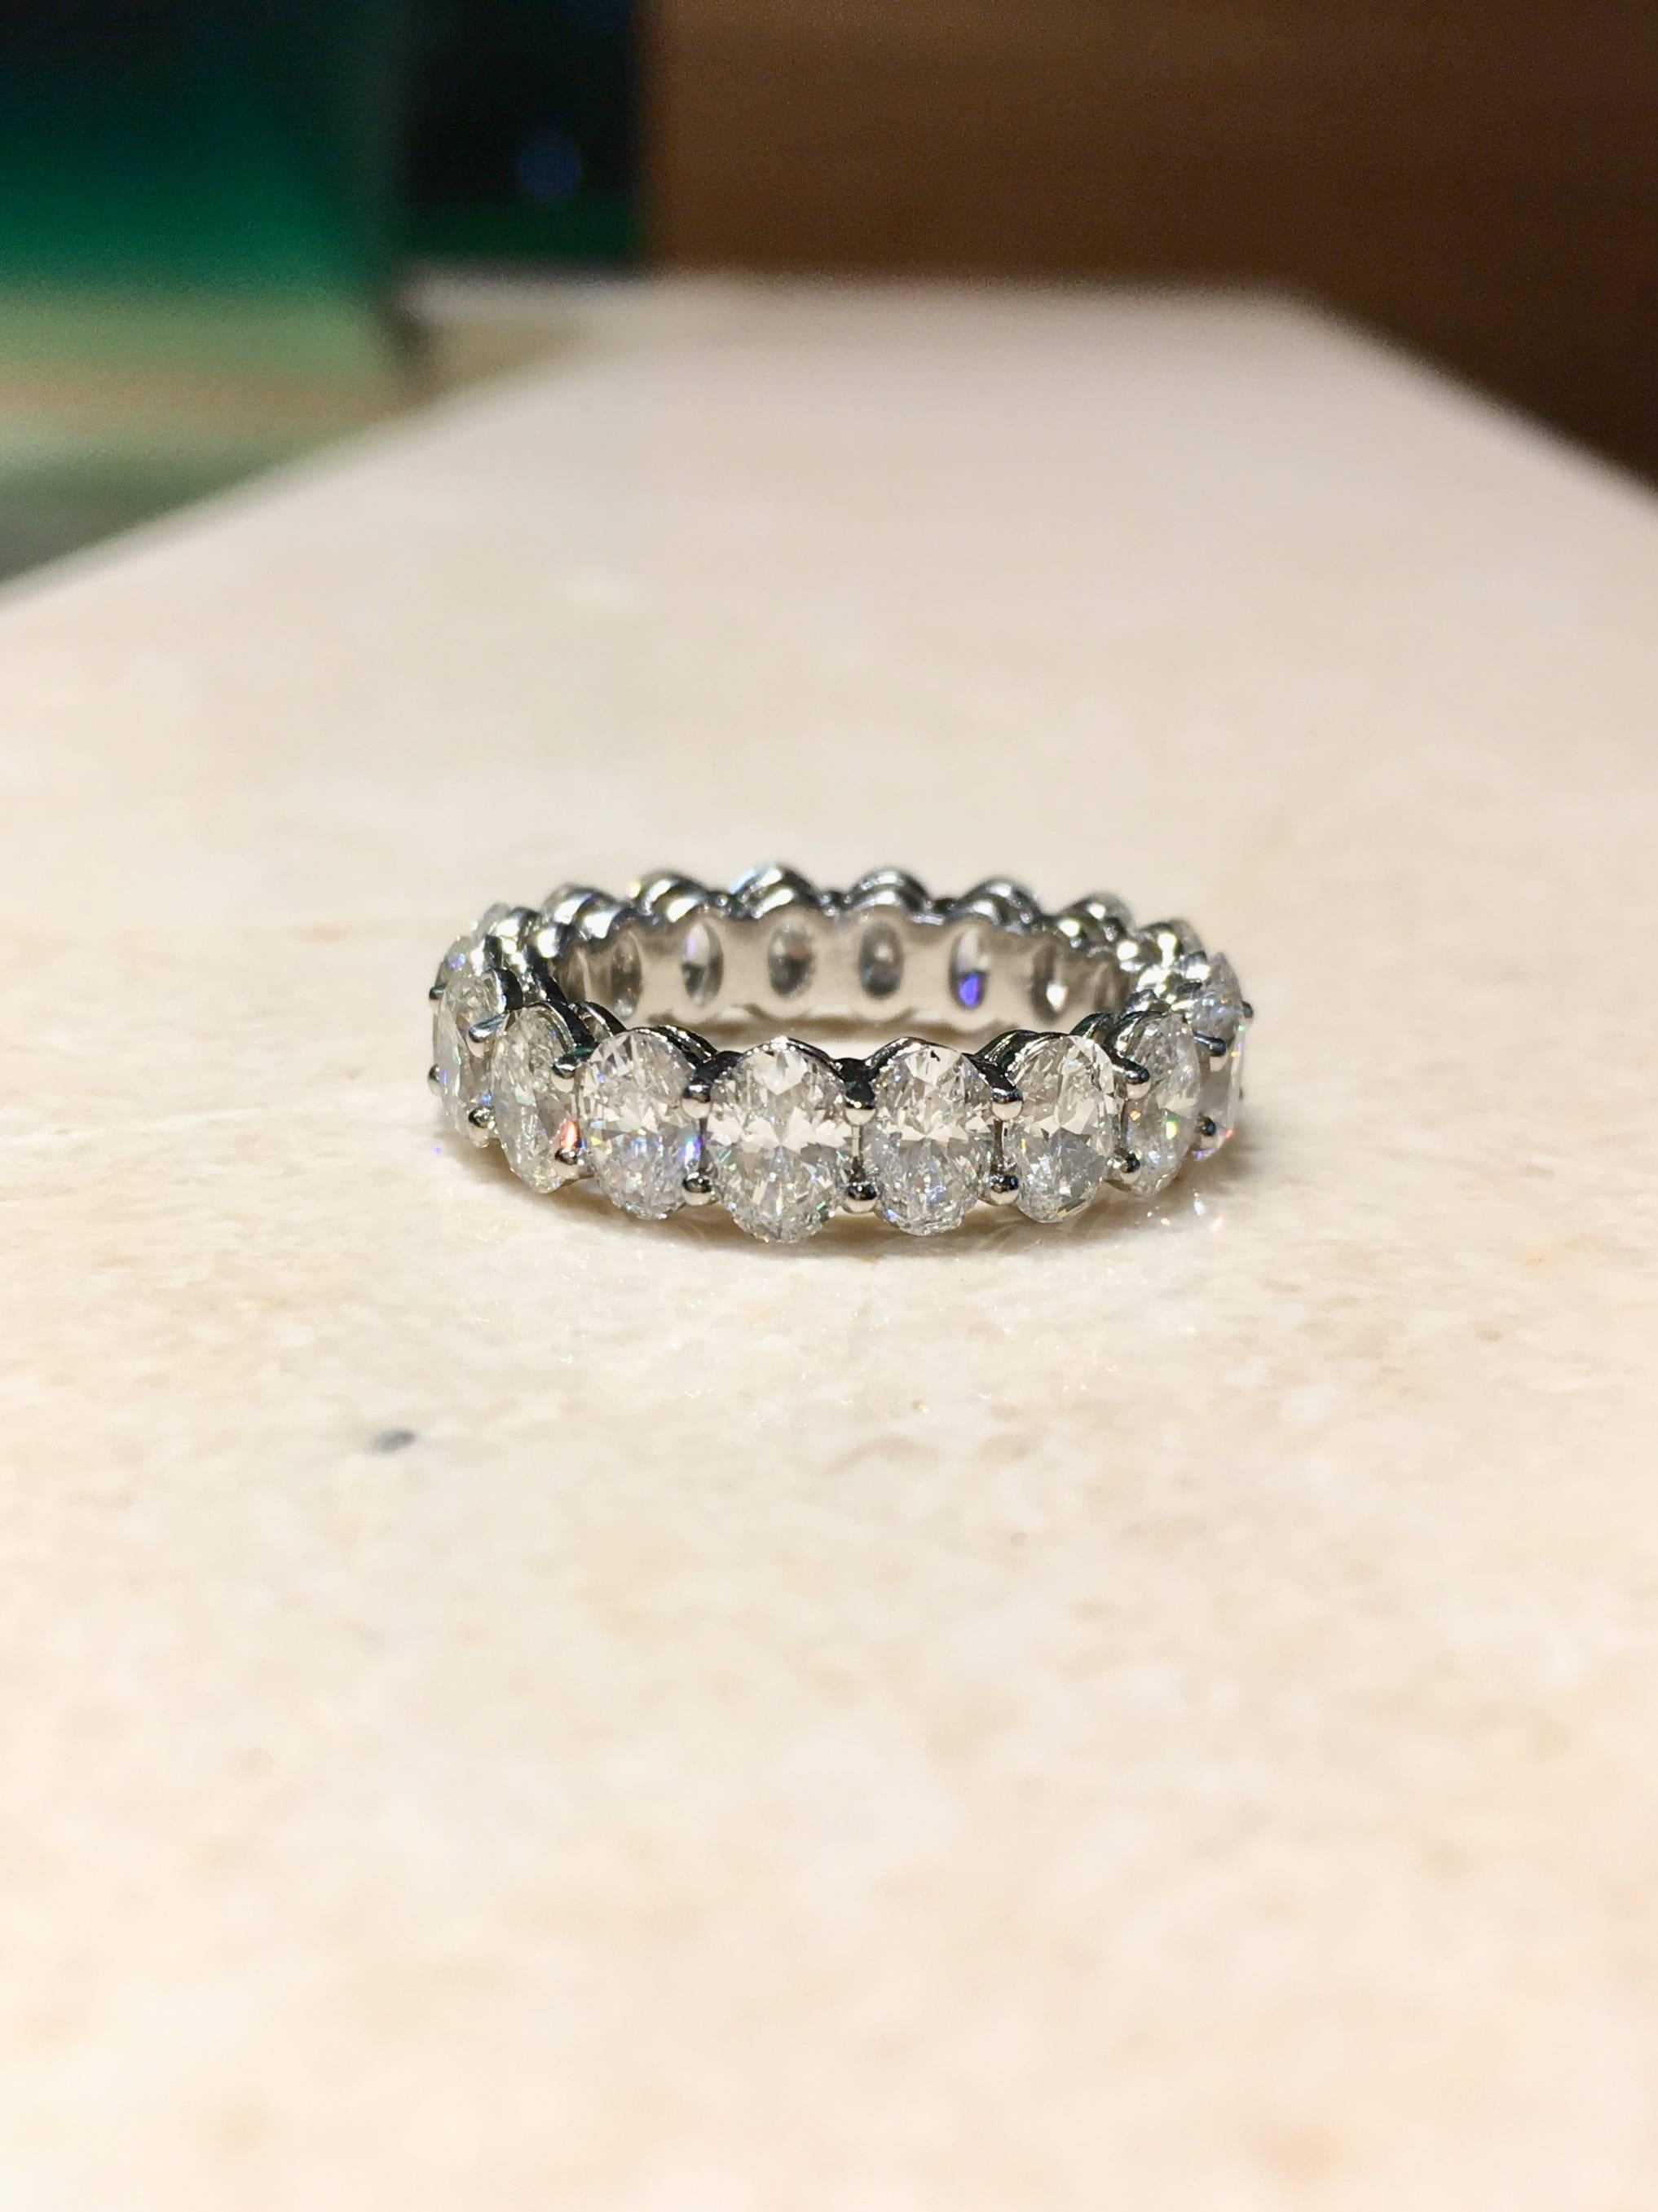 Oval diamond platinum eternity band 5.58 carat weight.  This stunning ring has shared prongs featuring 18 oval shaped diamonds VS2 clarity, G - I colour, good cut. Finger size 6.5